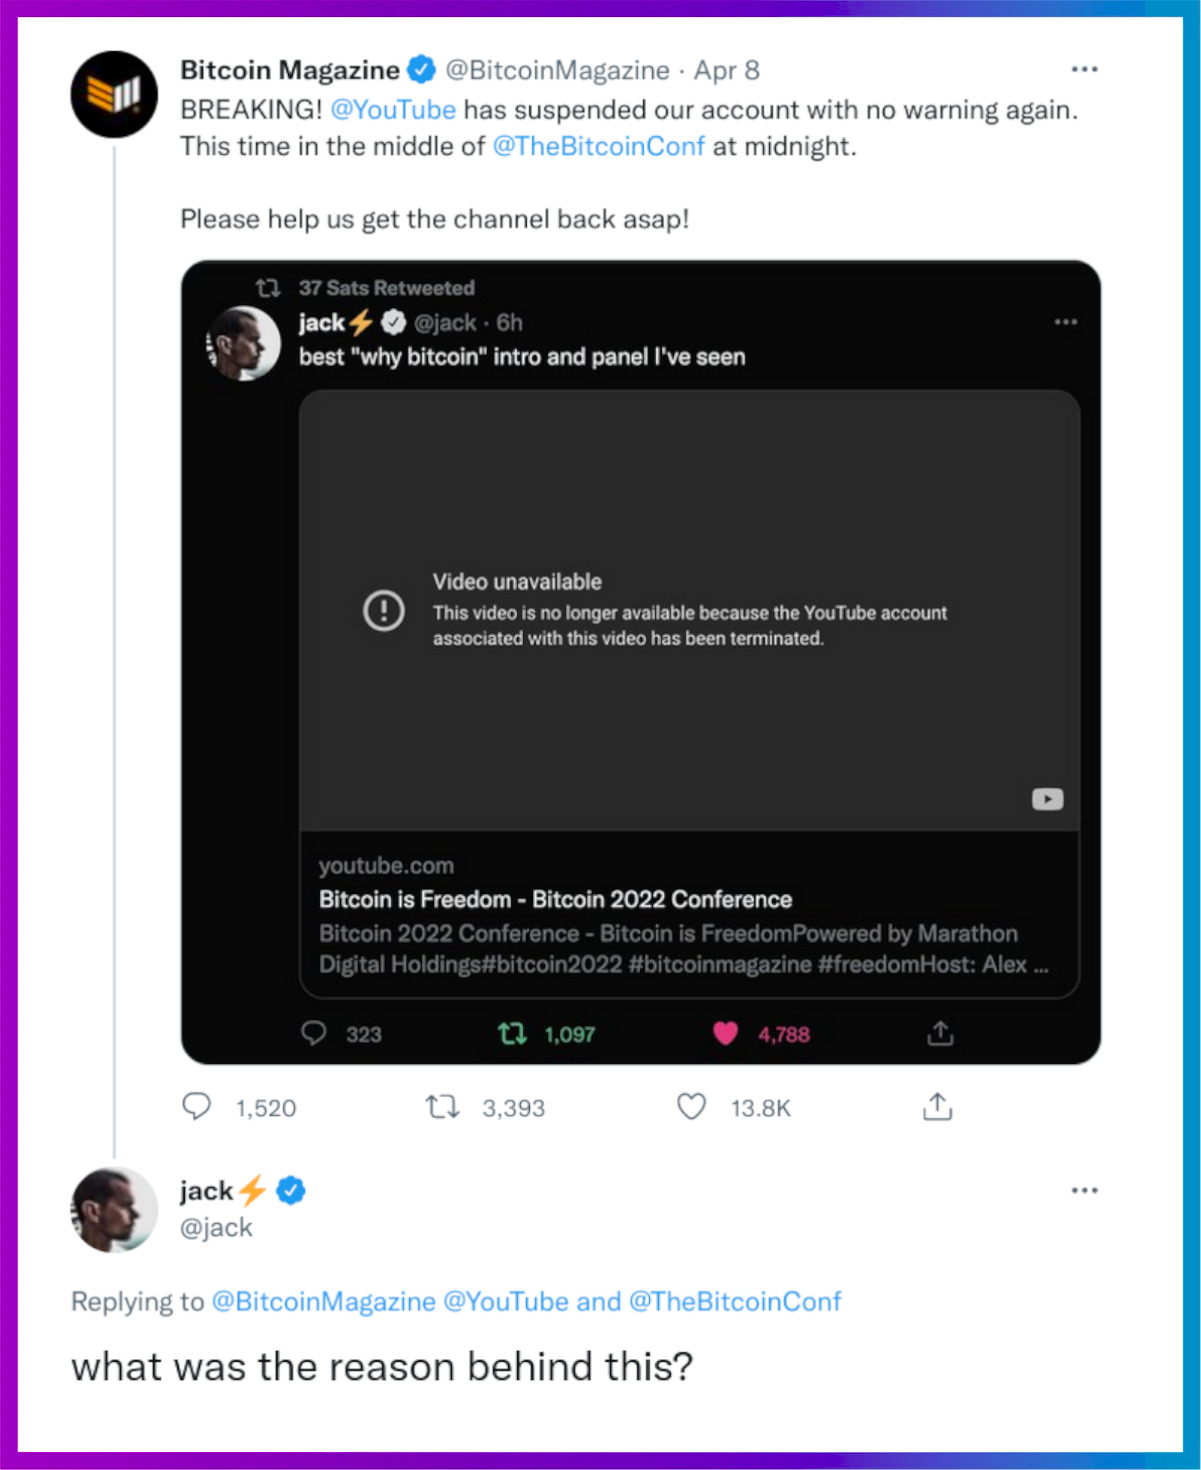 Twitter founder Jack asks YouTube why the Bitcoin video was removed.